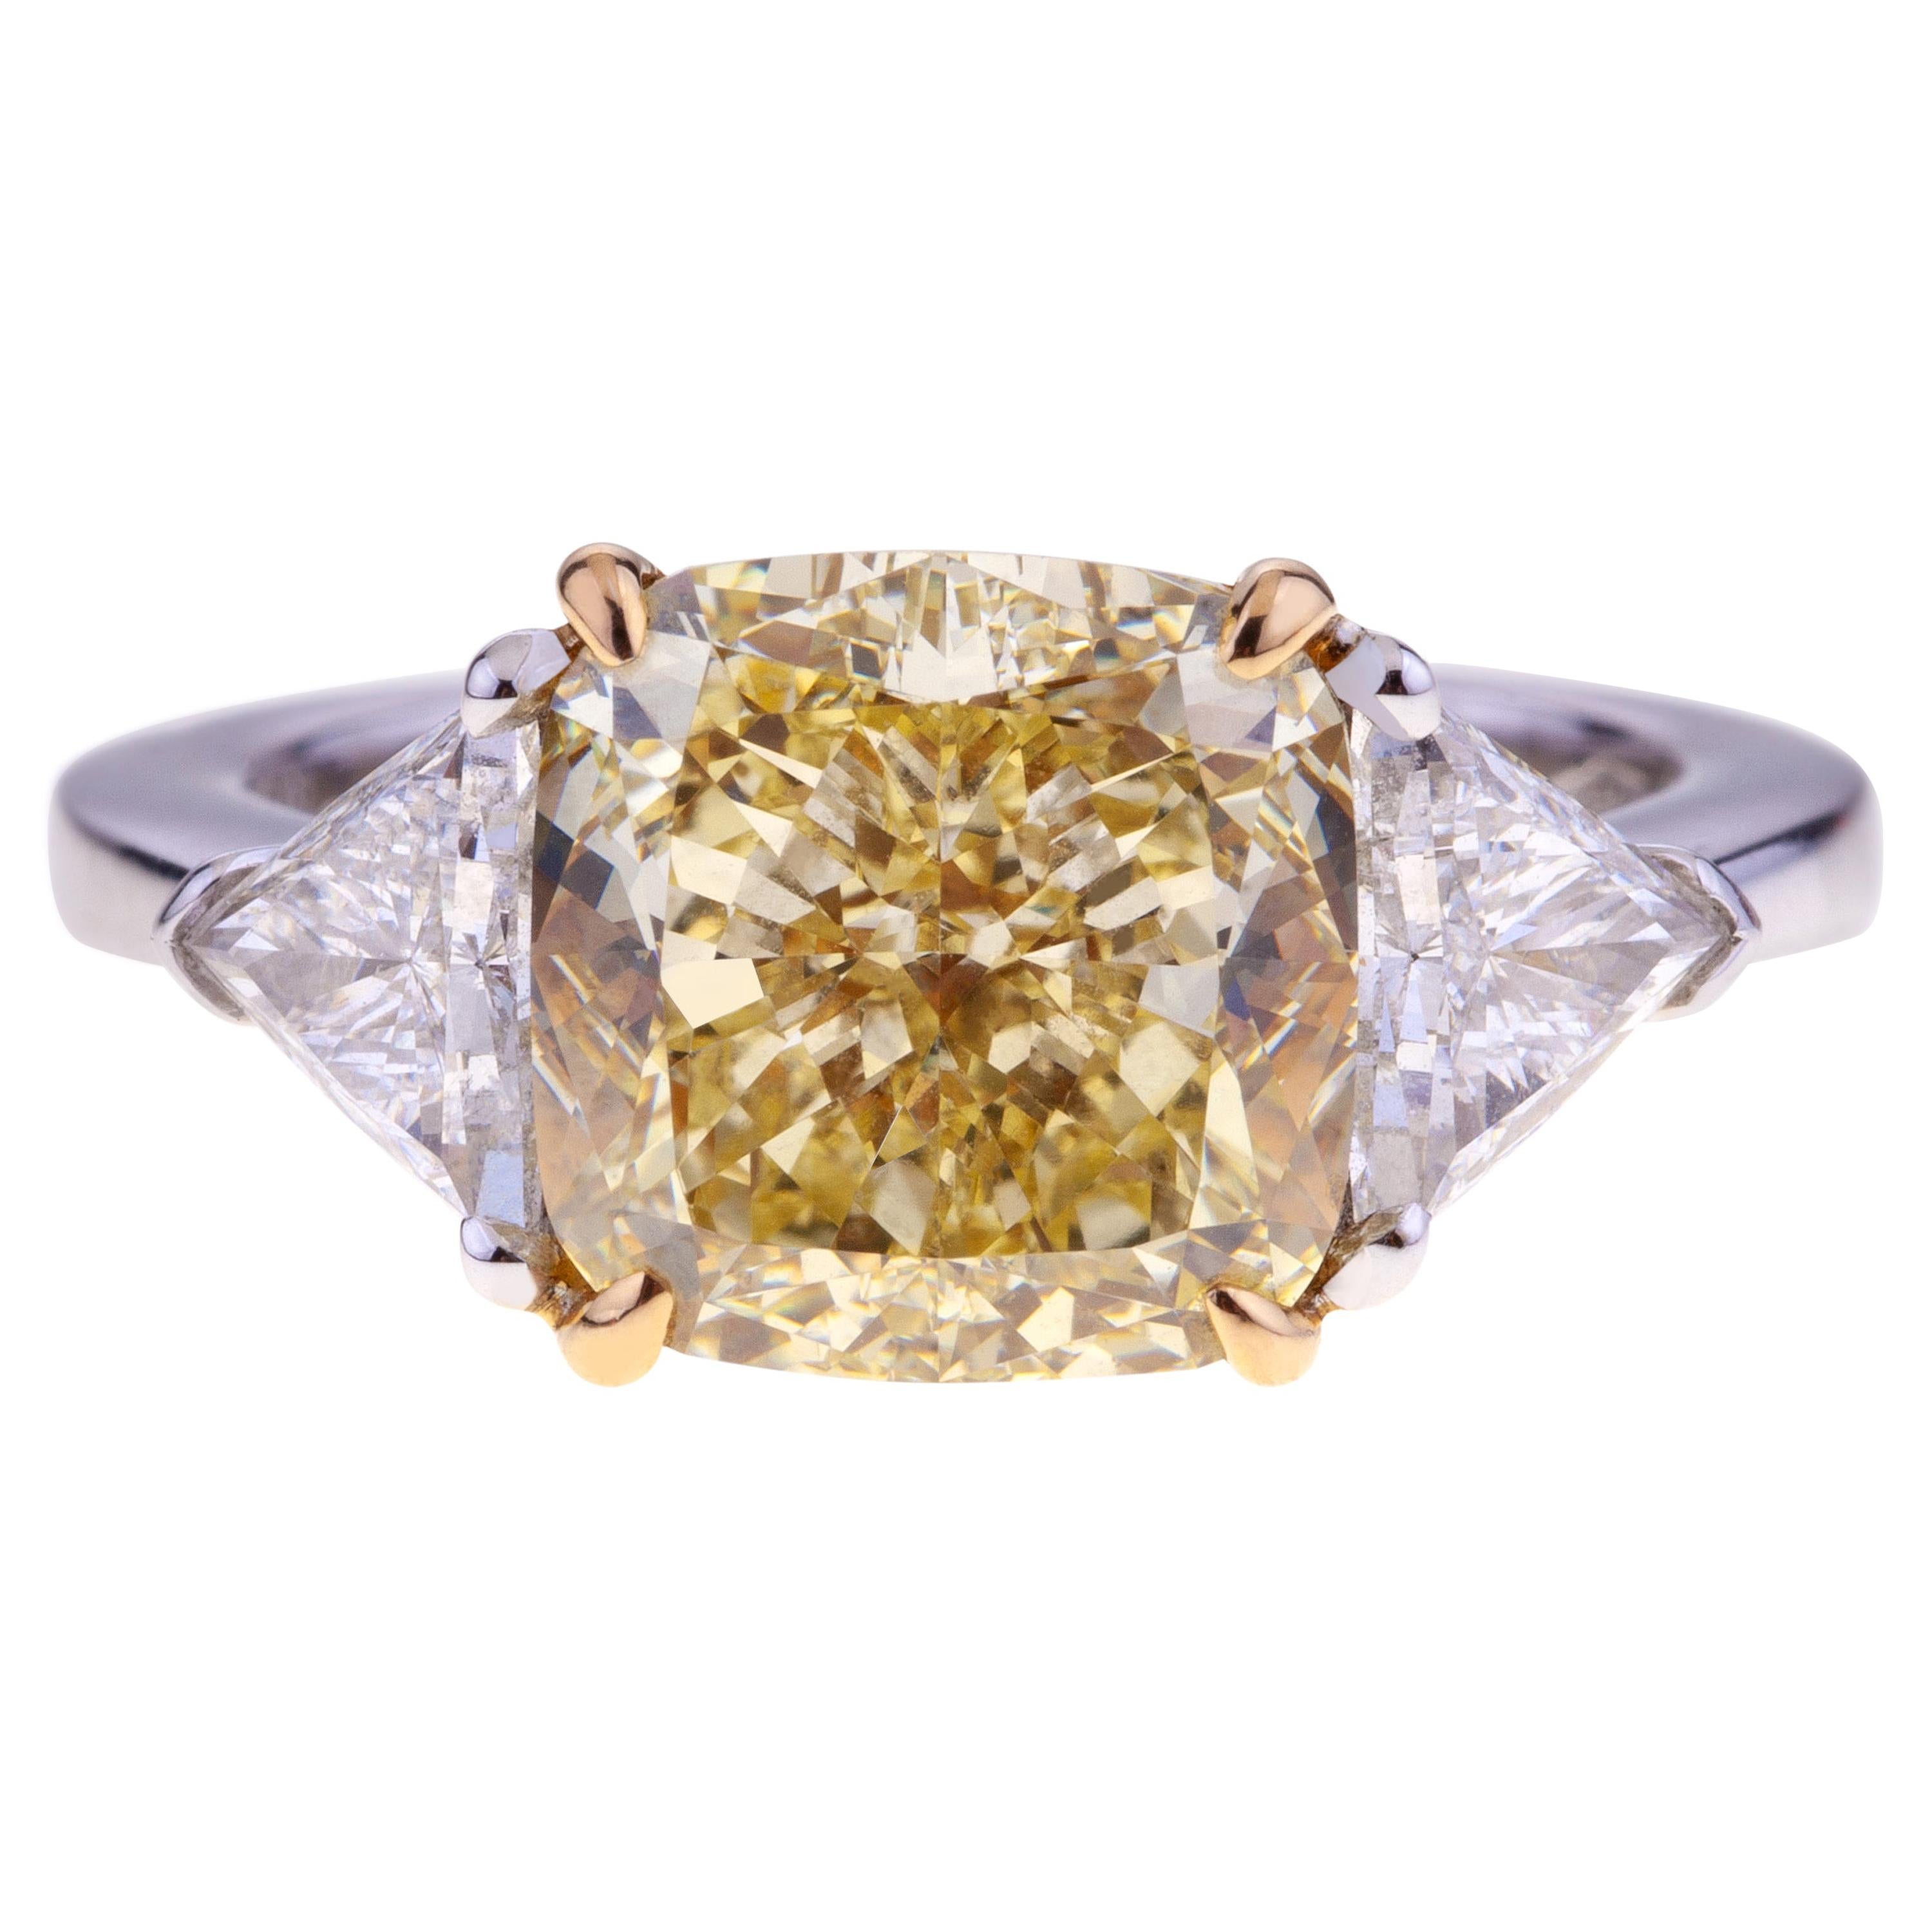 Cushion Cut Fancy Diamond ct. 5.03 GIA Certificate Ring White Gold with Two Side Triangle Diamonds.
Elegant Ring with Unique Cushion Cut Brilliant Fancy Yellow Diamond VS2 ct. 5.03 size 9.41x9.32x6.1 no Fluorescence GIA certificate n. 1152274257 + 2